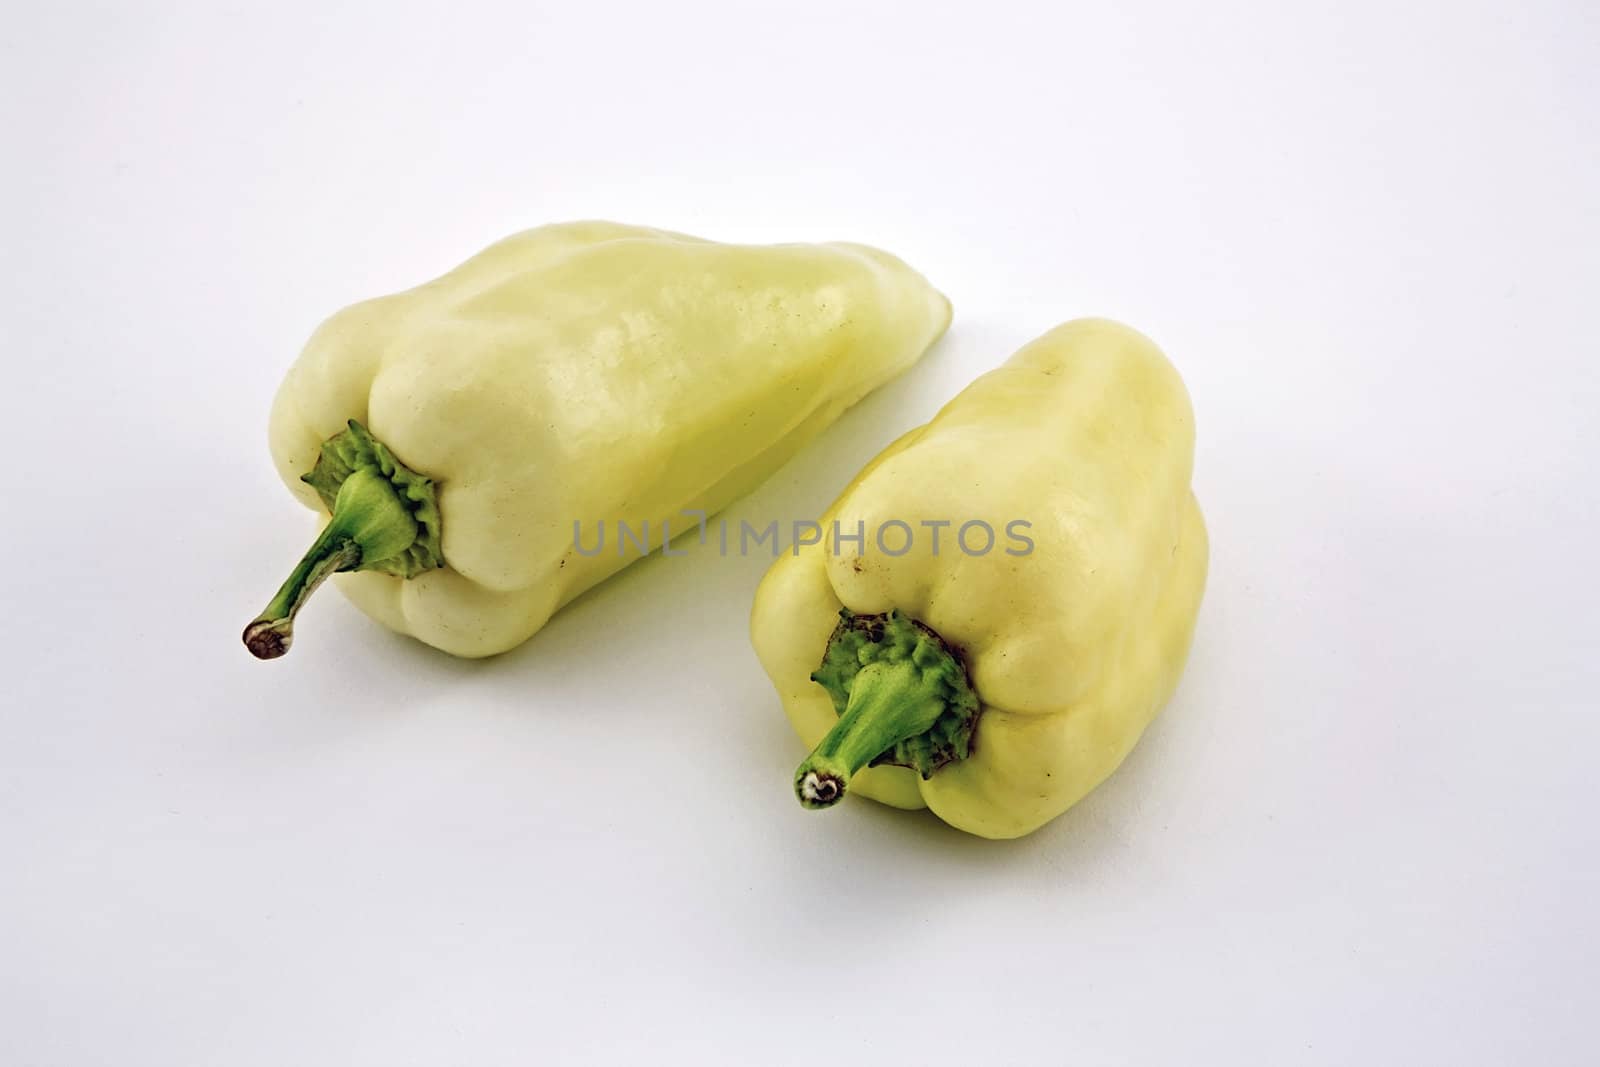 Two sweet hungarian peppers on white background